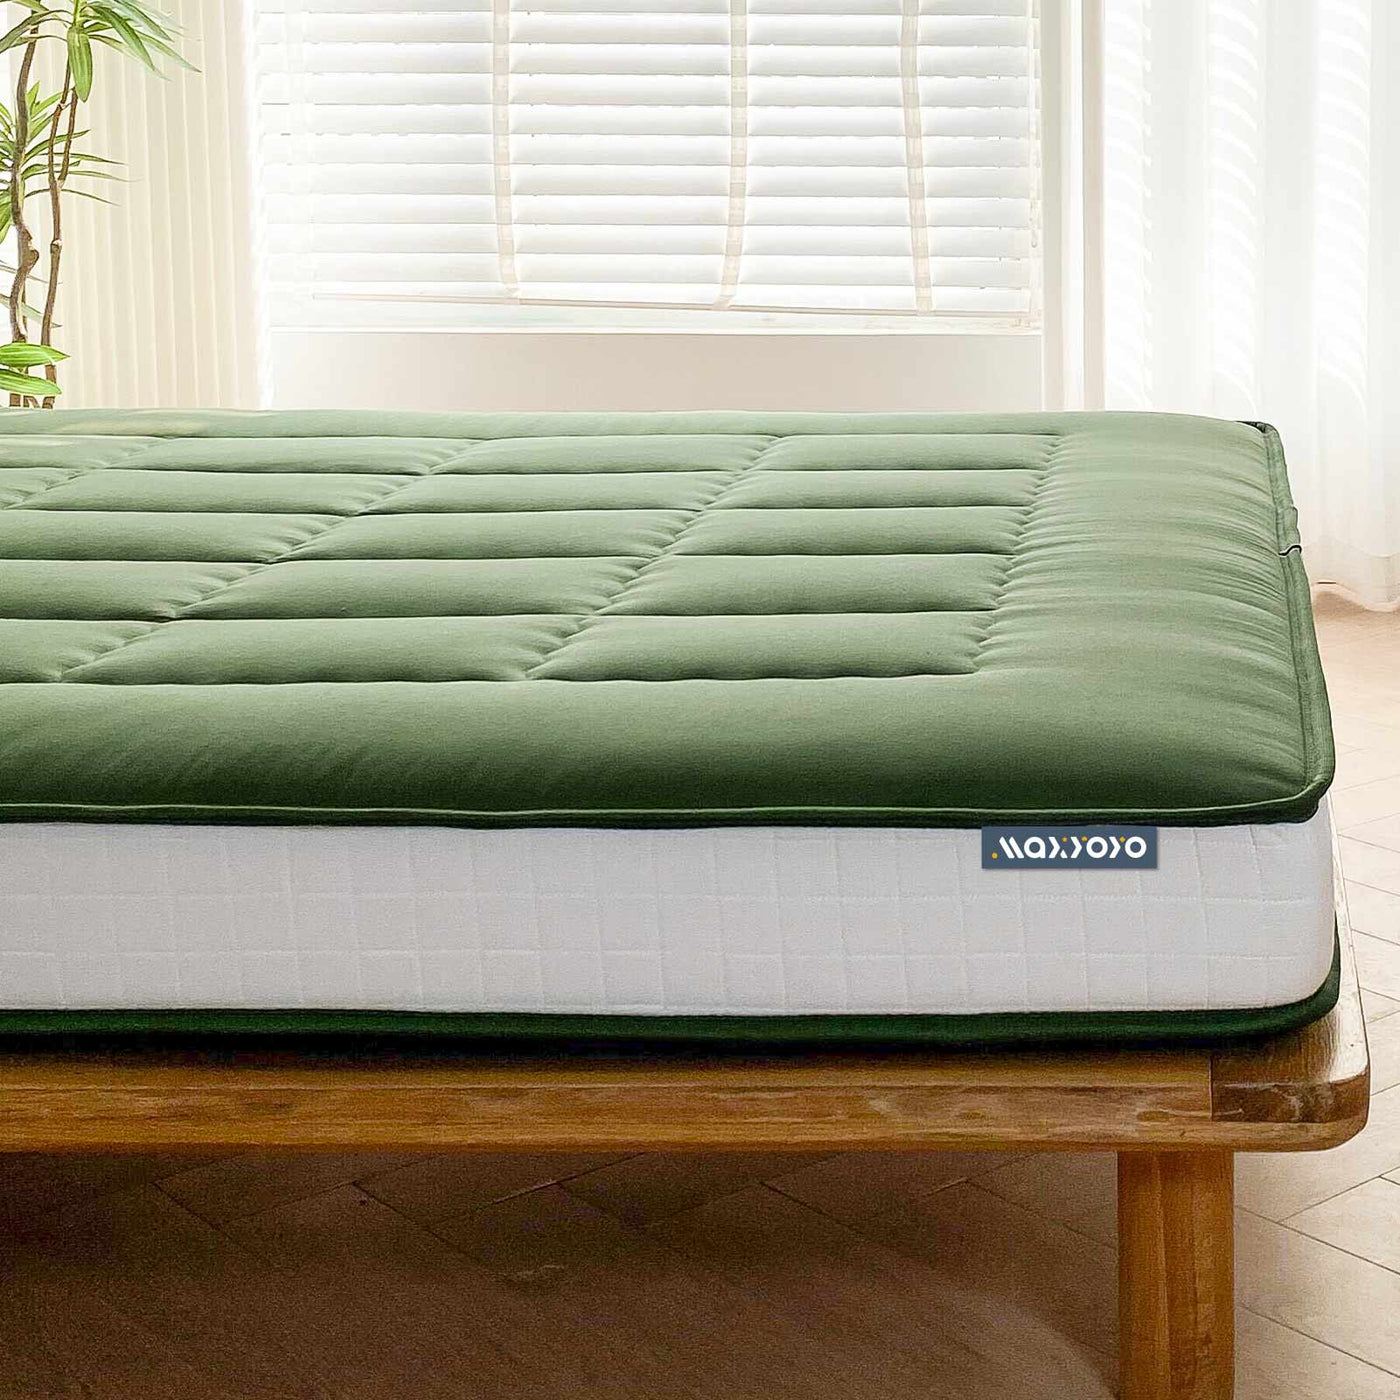 MAXYOYO 6" Extra Thick Japanese Futon Mattress with Rectangle Quilted, Stylish Floor Bed For Family, Green